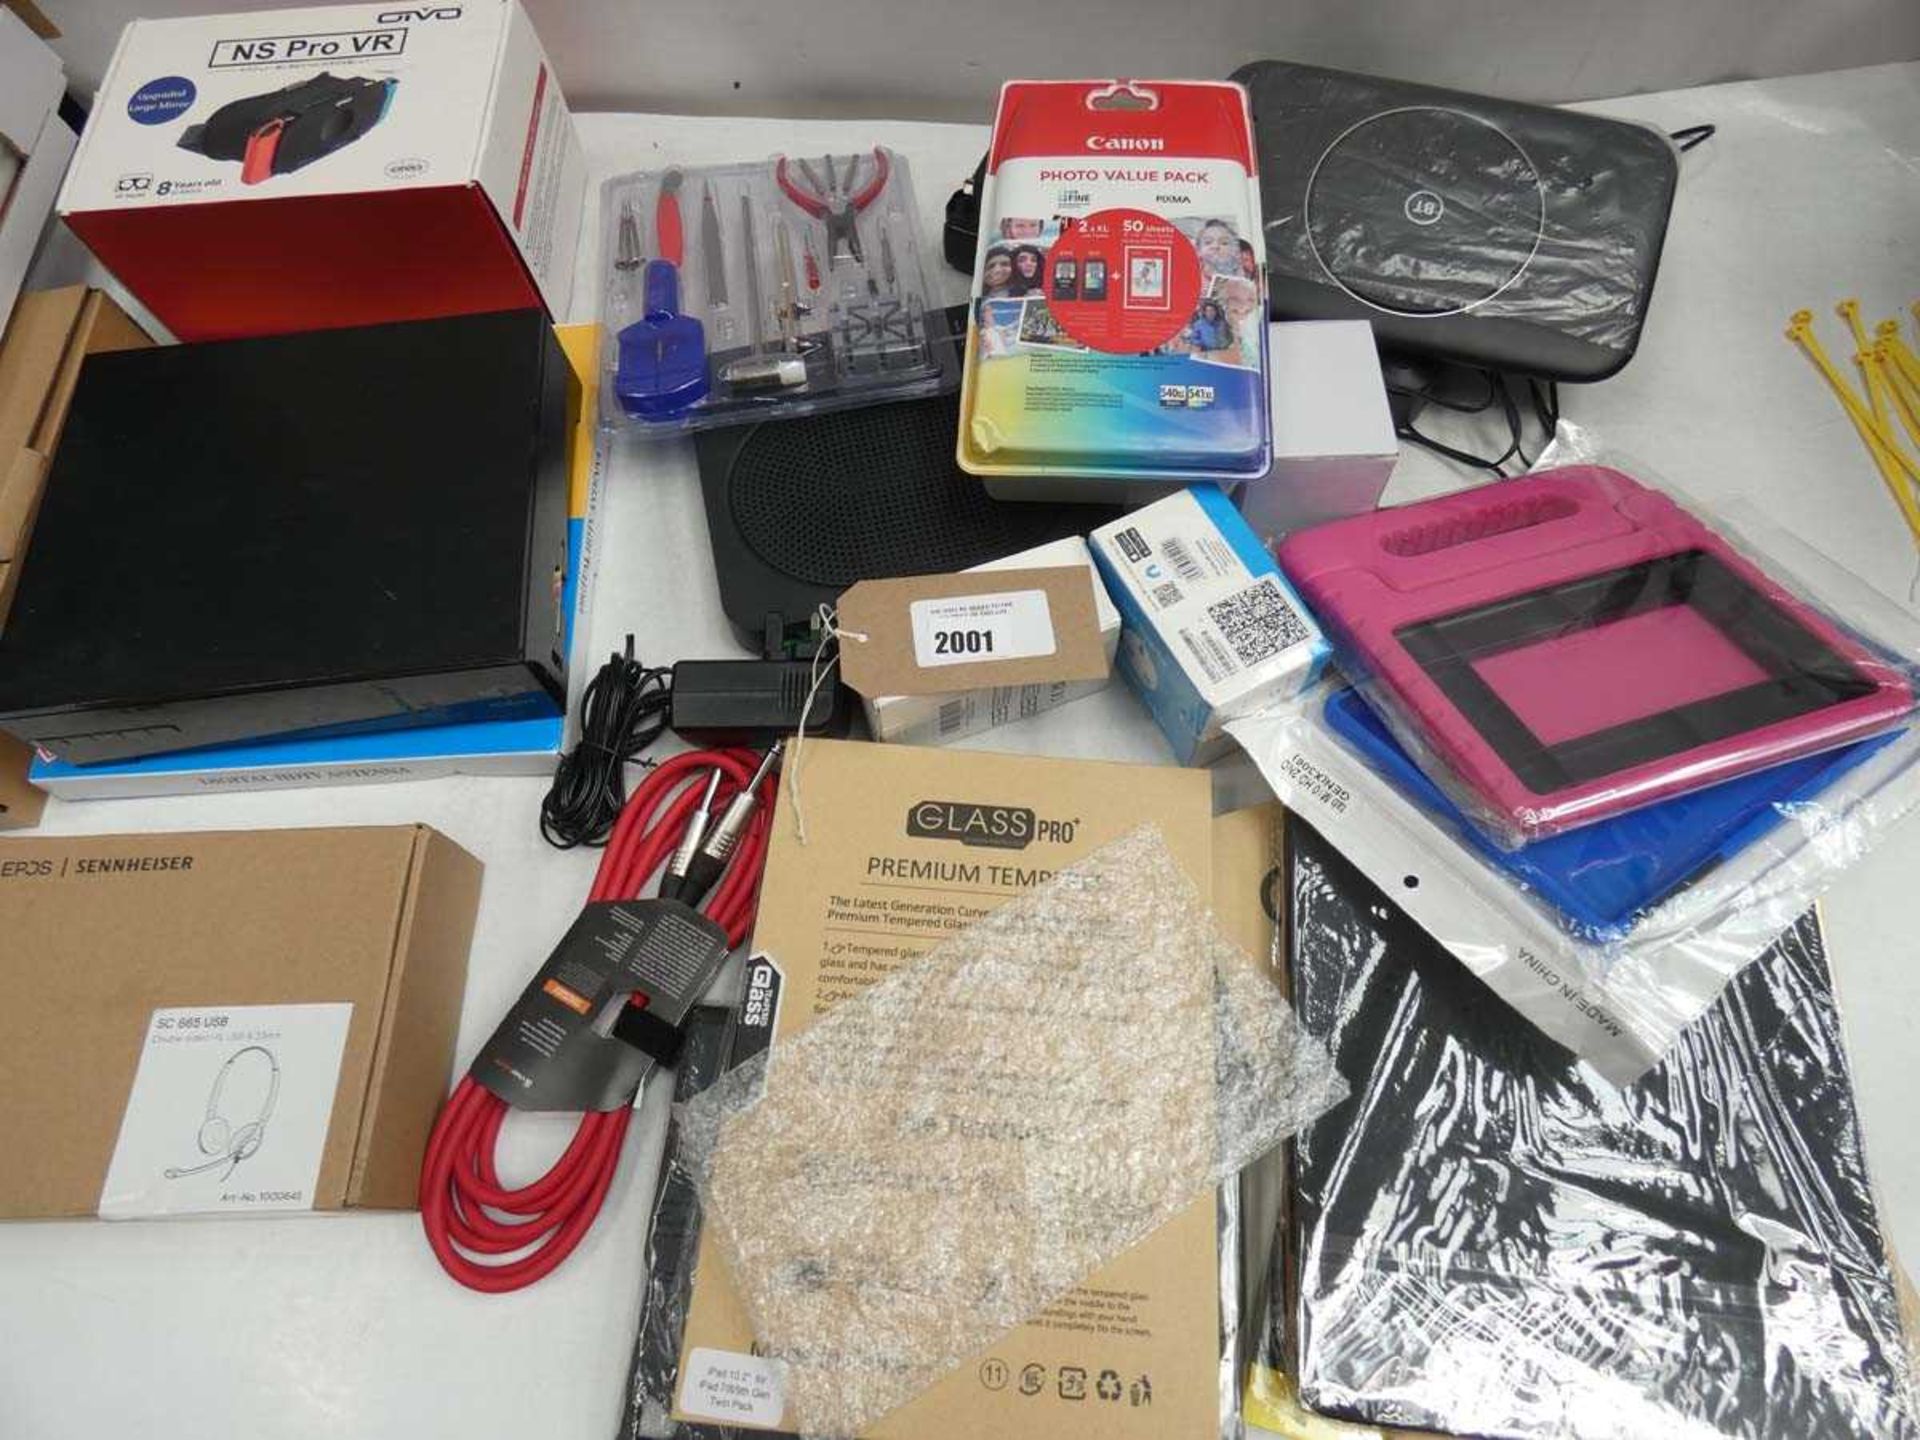 +VAT Mixed lot of routers, tablet covers, headset, watch repair kit, VR headset, NOS DVR, etc